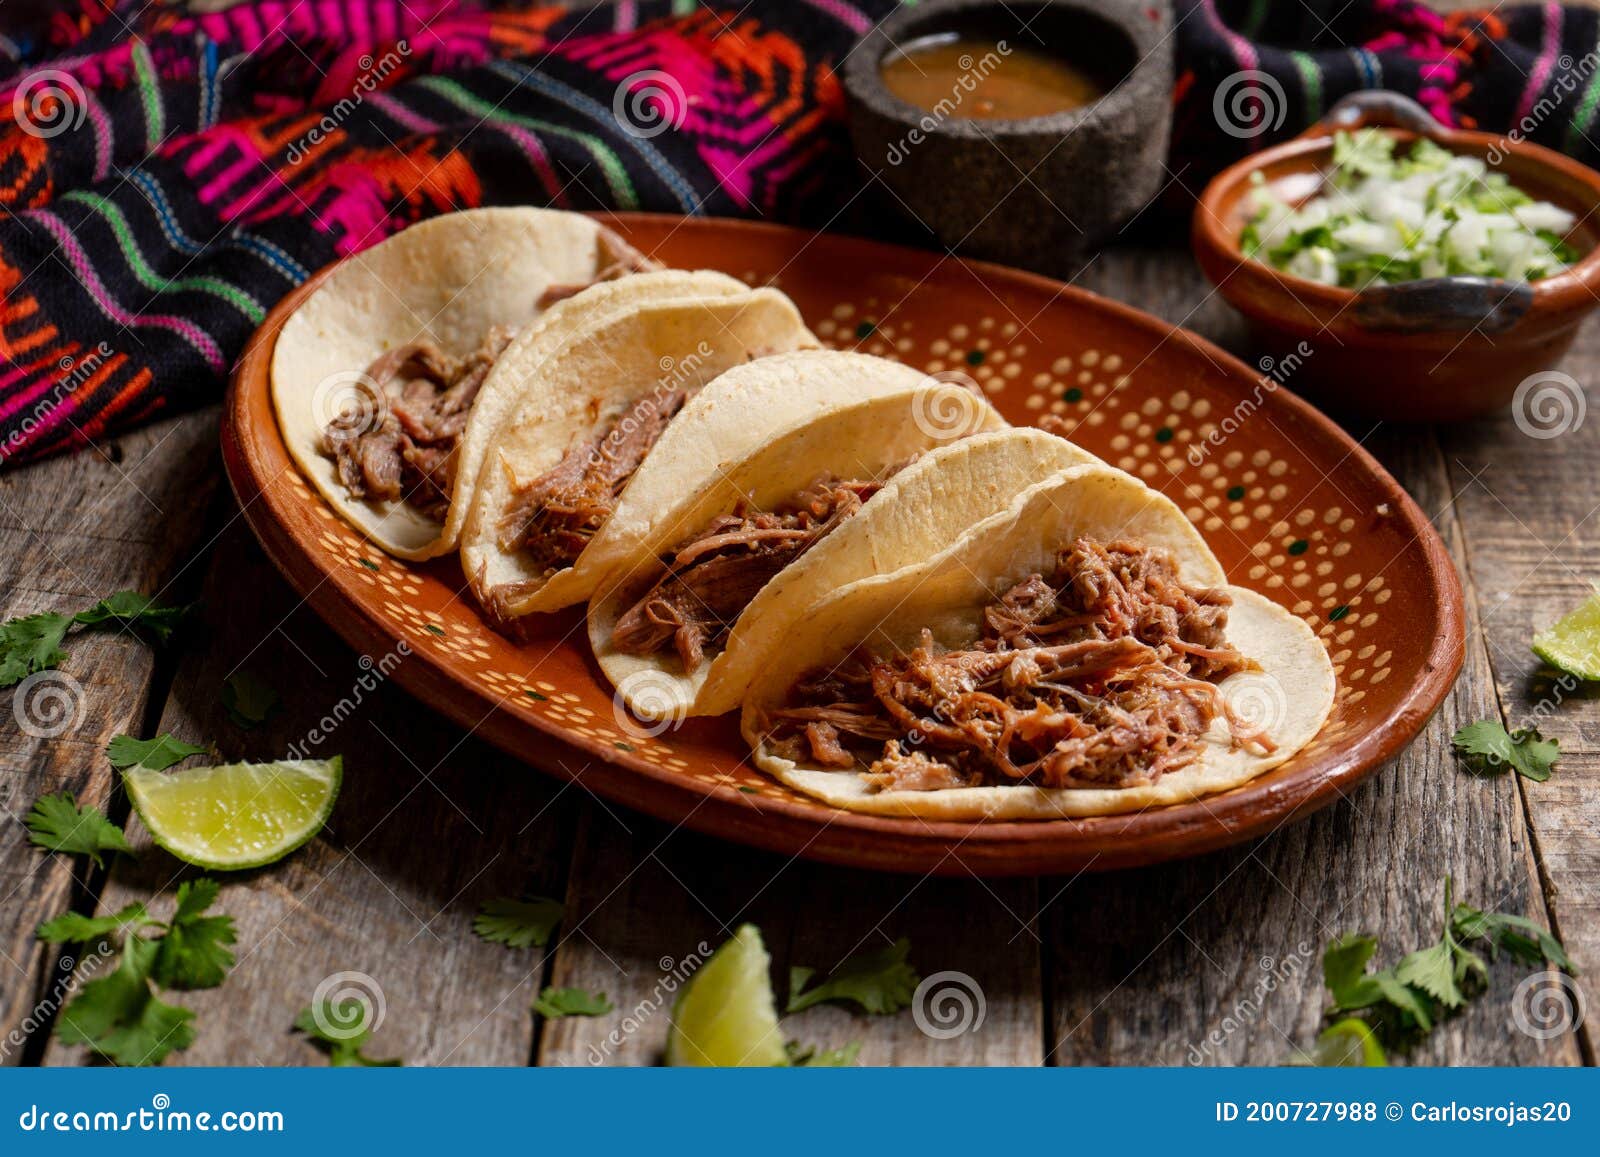 mexican slow cooked lamb tacos also called barbacoa on wooden background